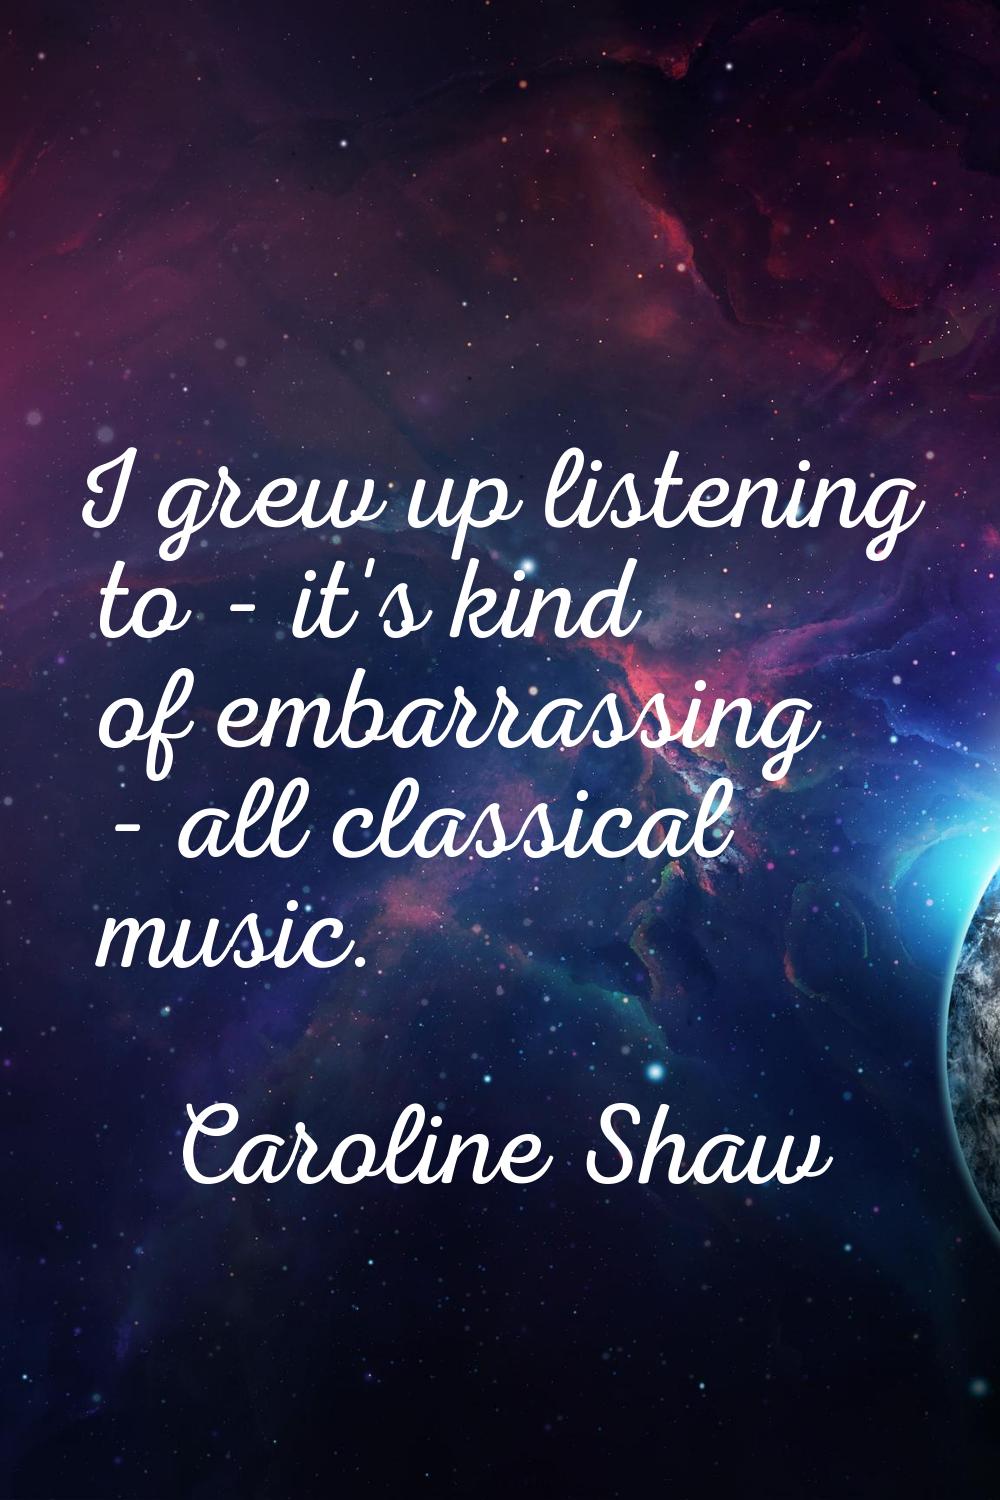 I grew up listening to - it's kind of embarrassing - all classical music.